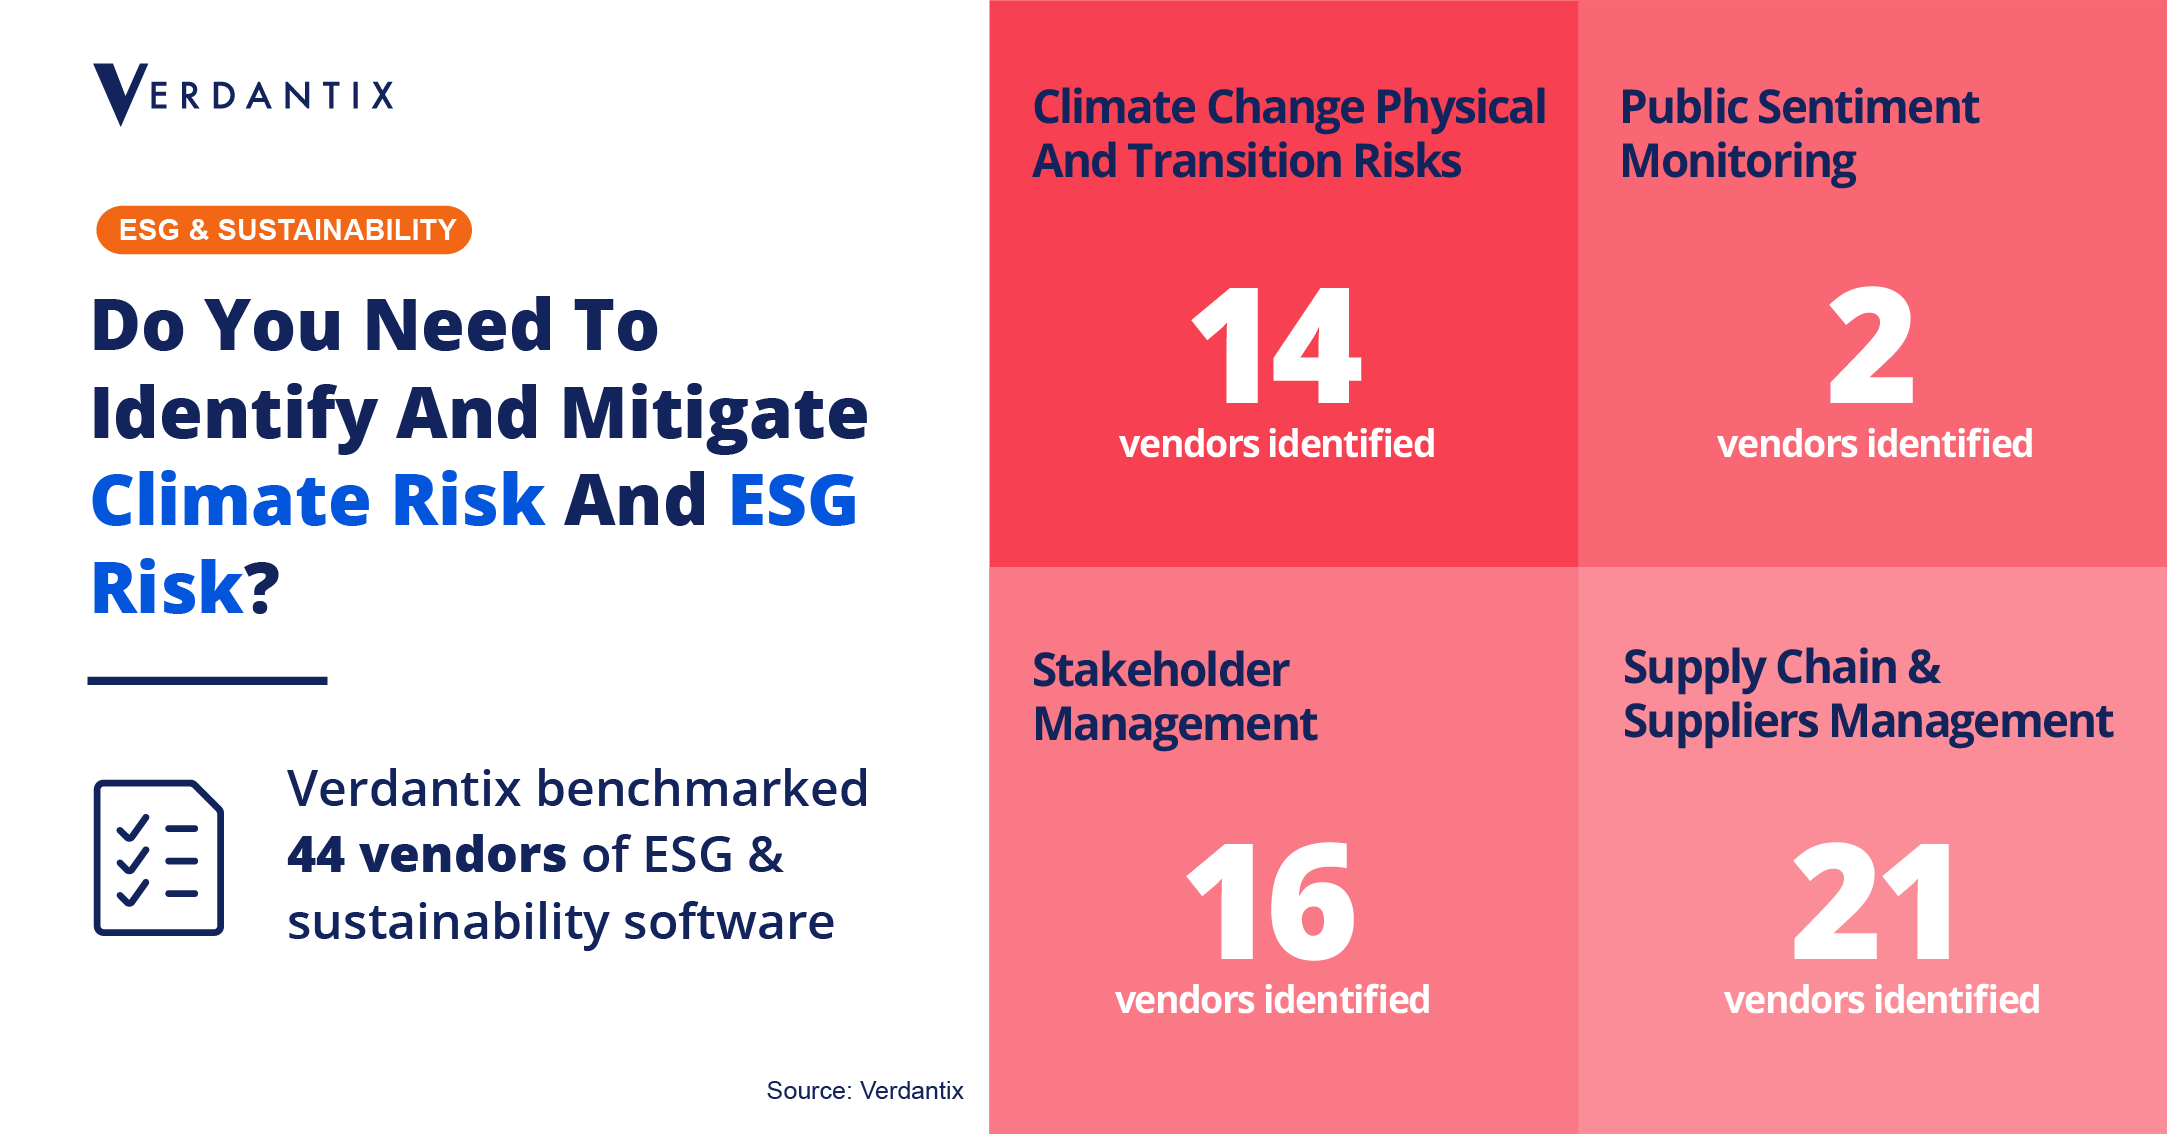 Digital Solutions Help Firms To Identify And Mitigate ESG Risks And Climate Risks